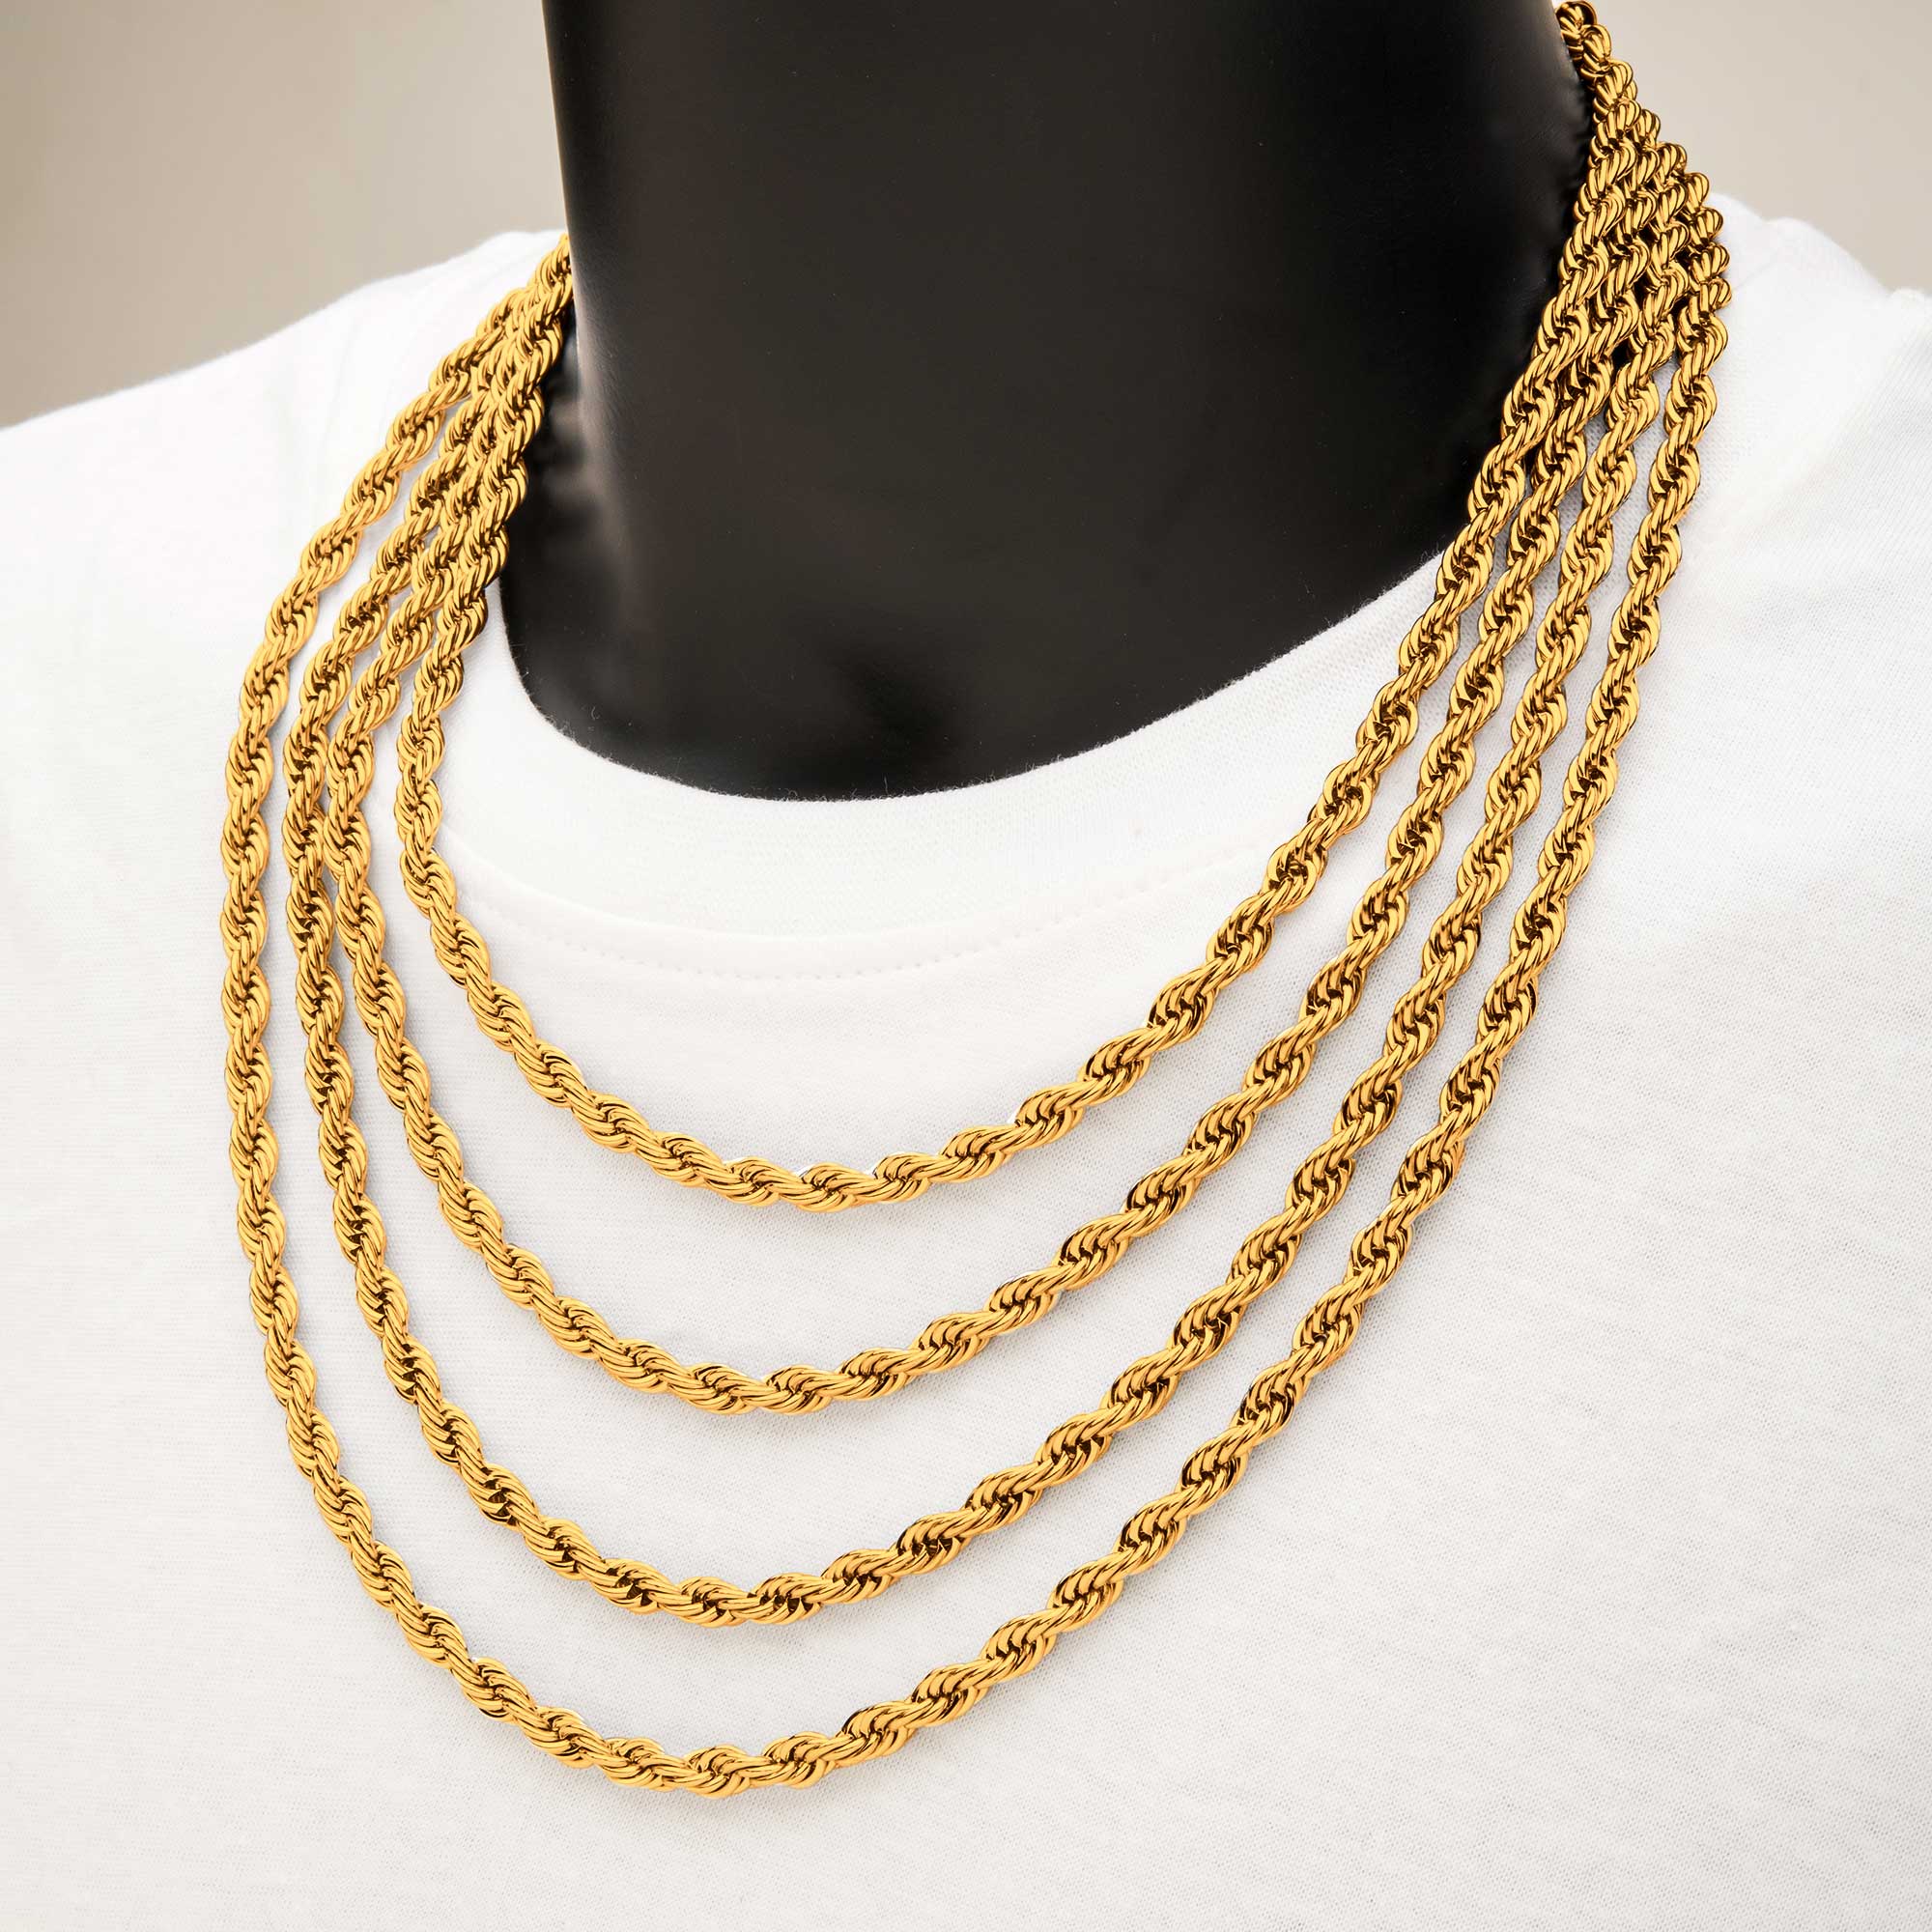 6mm 18K Gold Plated Rope Chain Image 3 P.K. Bennett Jewelers Mundelein, IL